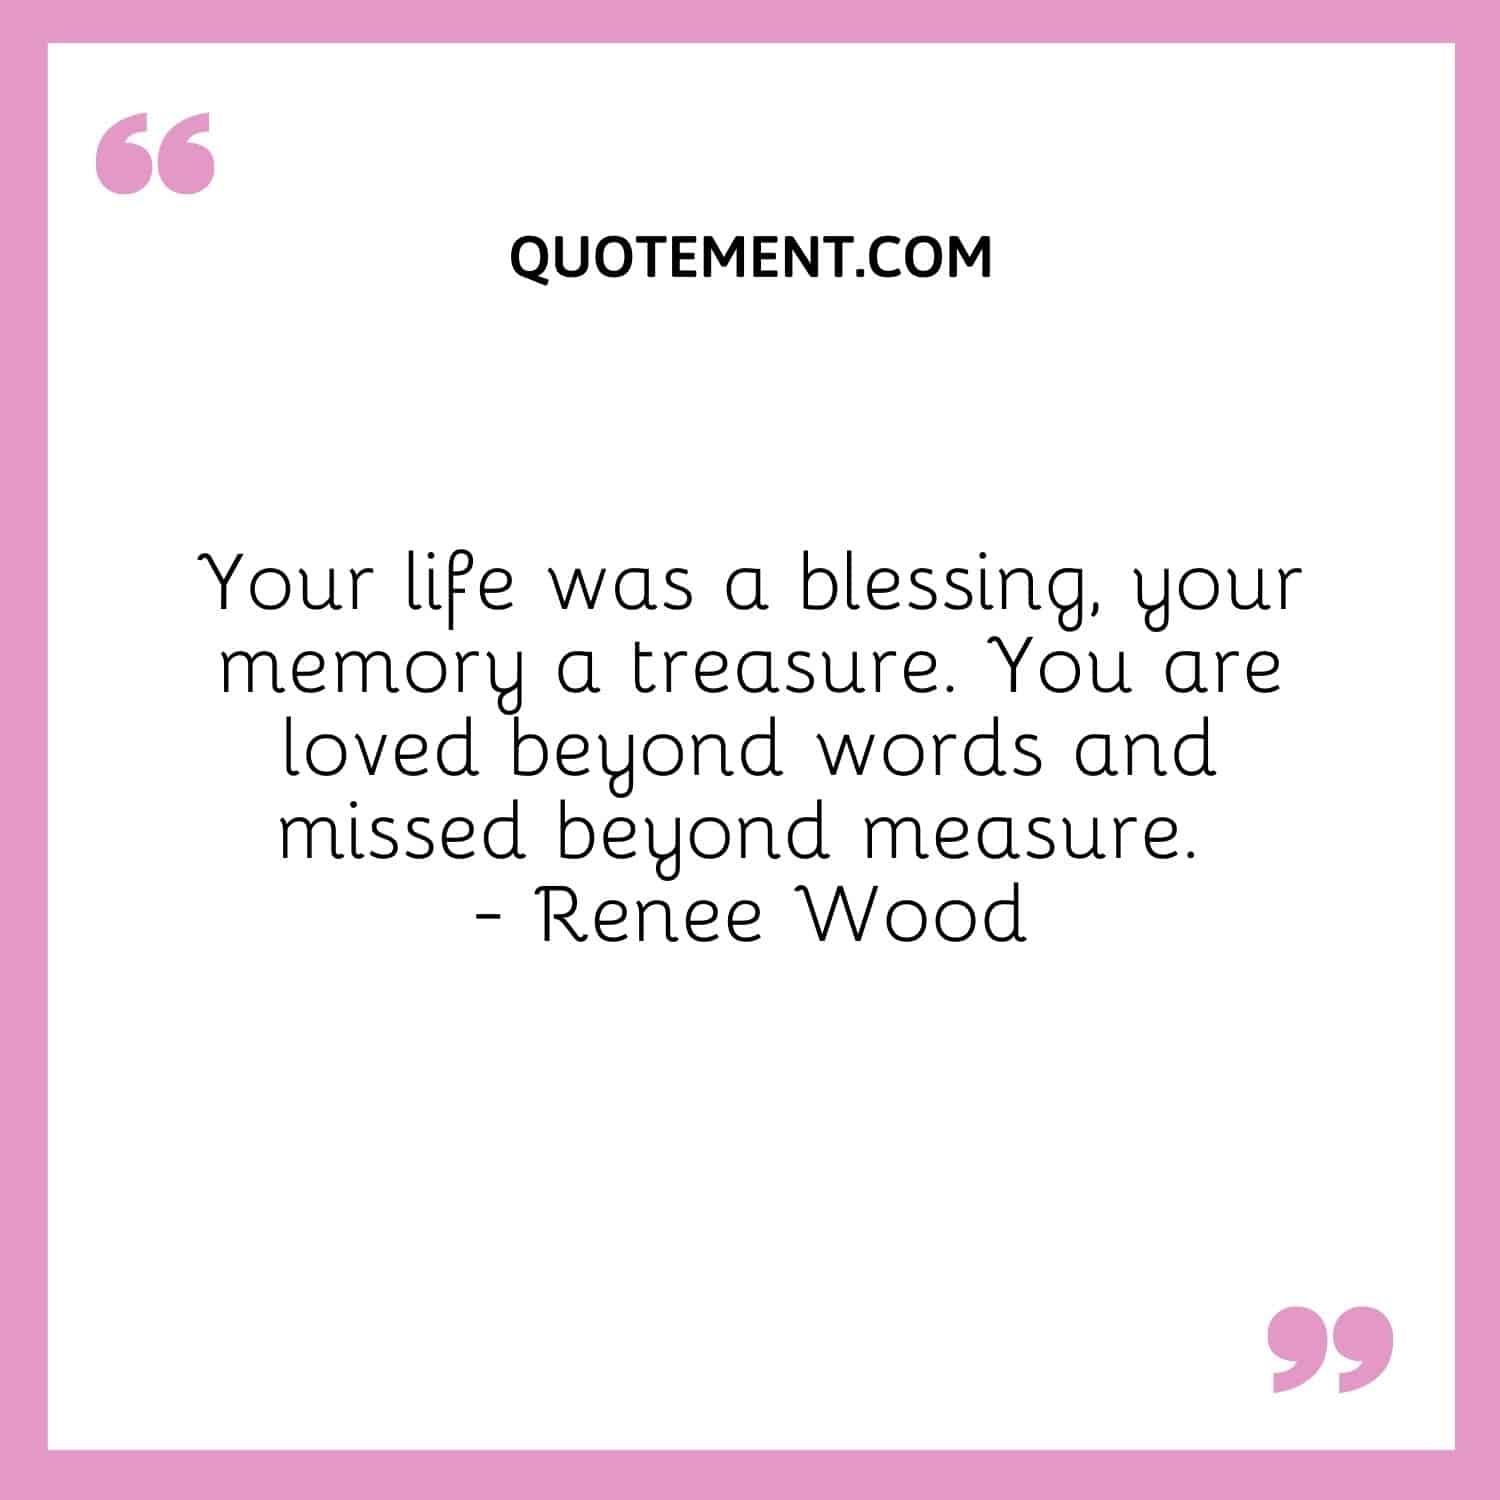 Your life was a blessing, your memory a treasure. You are loved beyond words and missed beyond measure. — Renee Wood